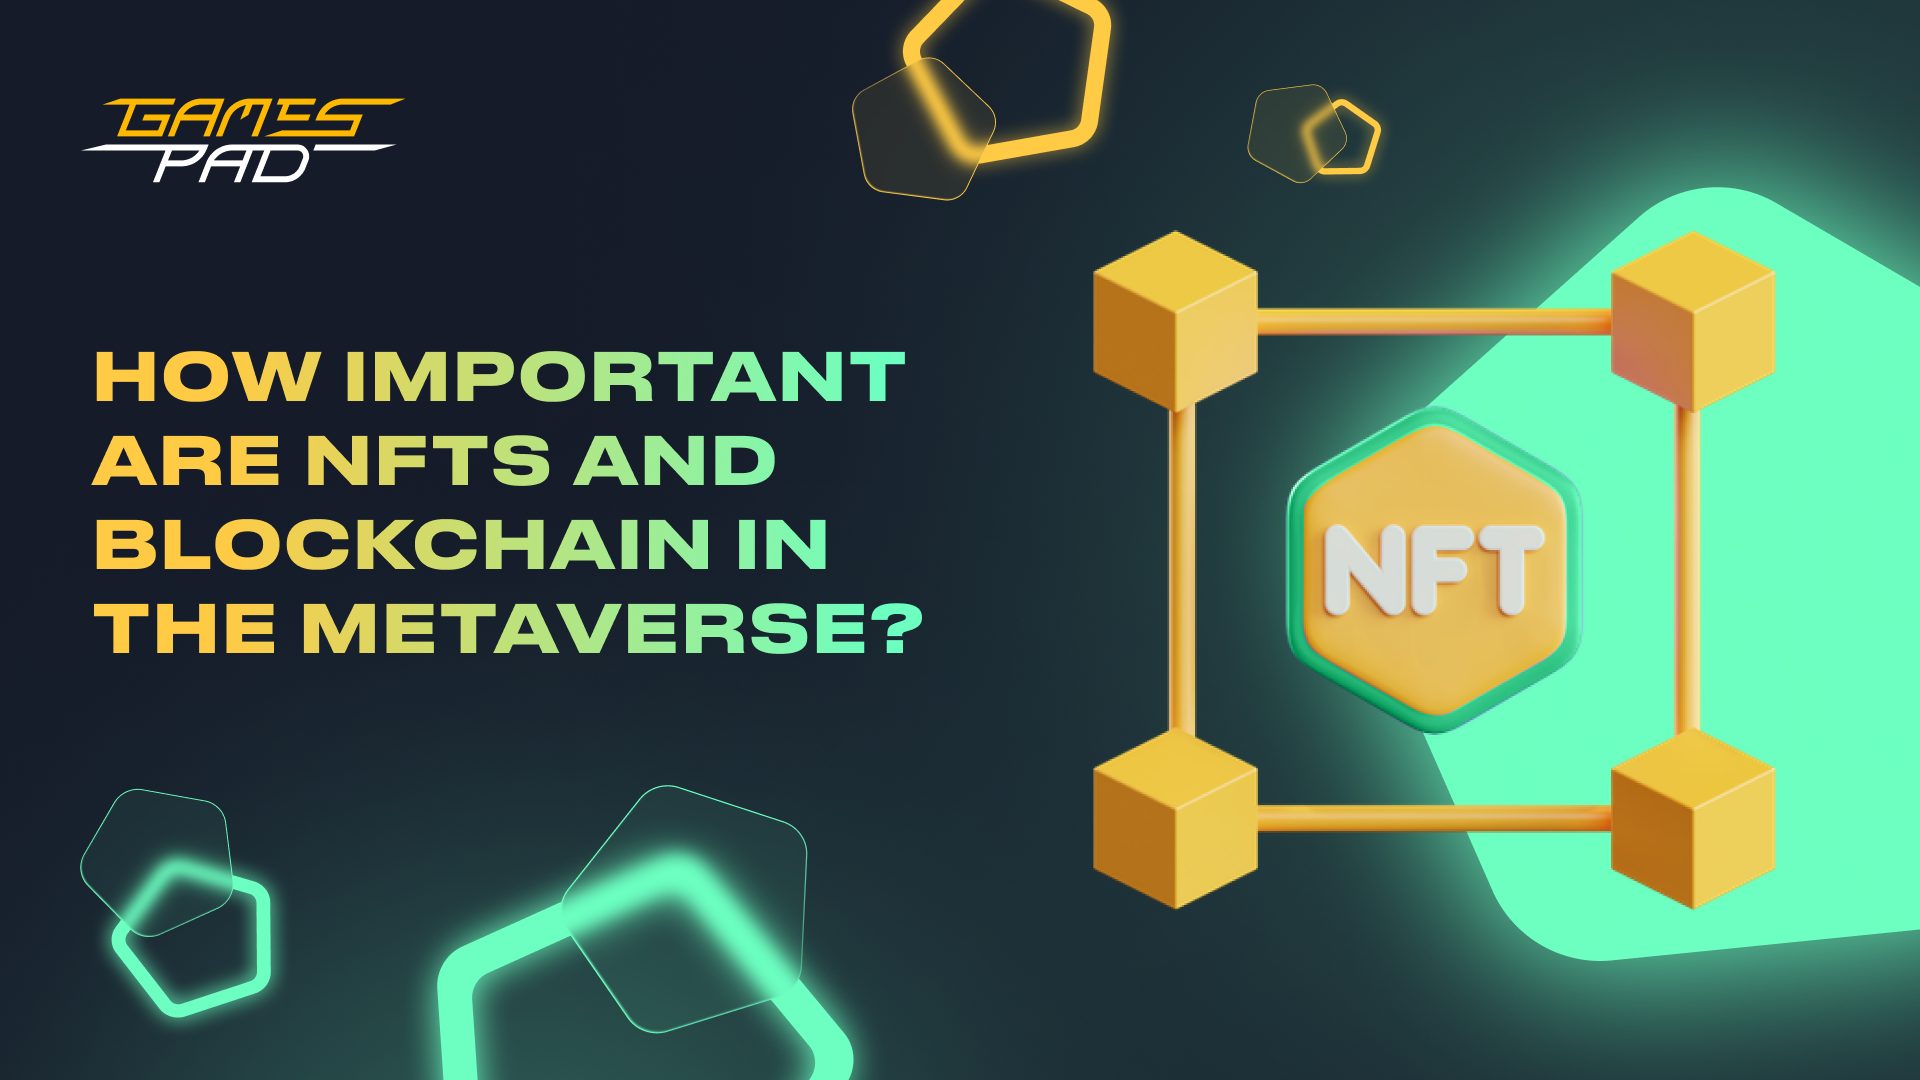 How Important Are NFTs And Blockchain In The Metaverse?